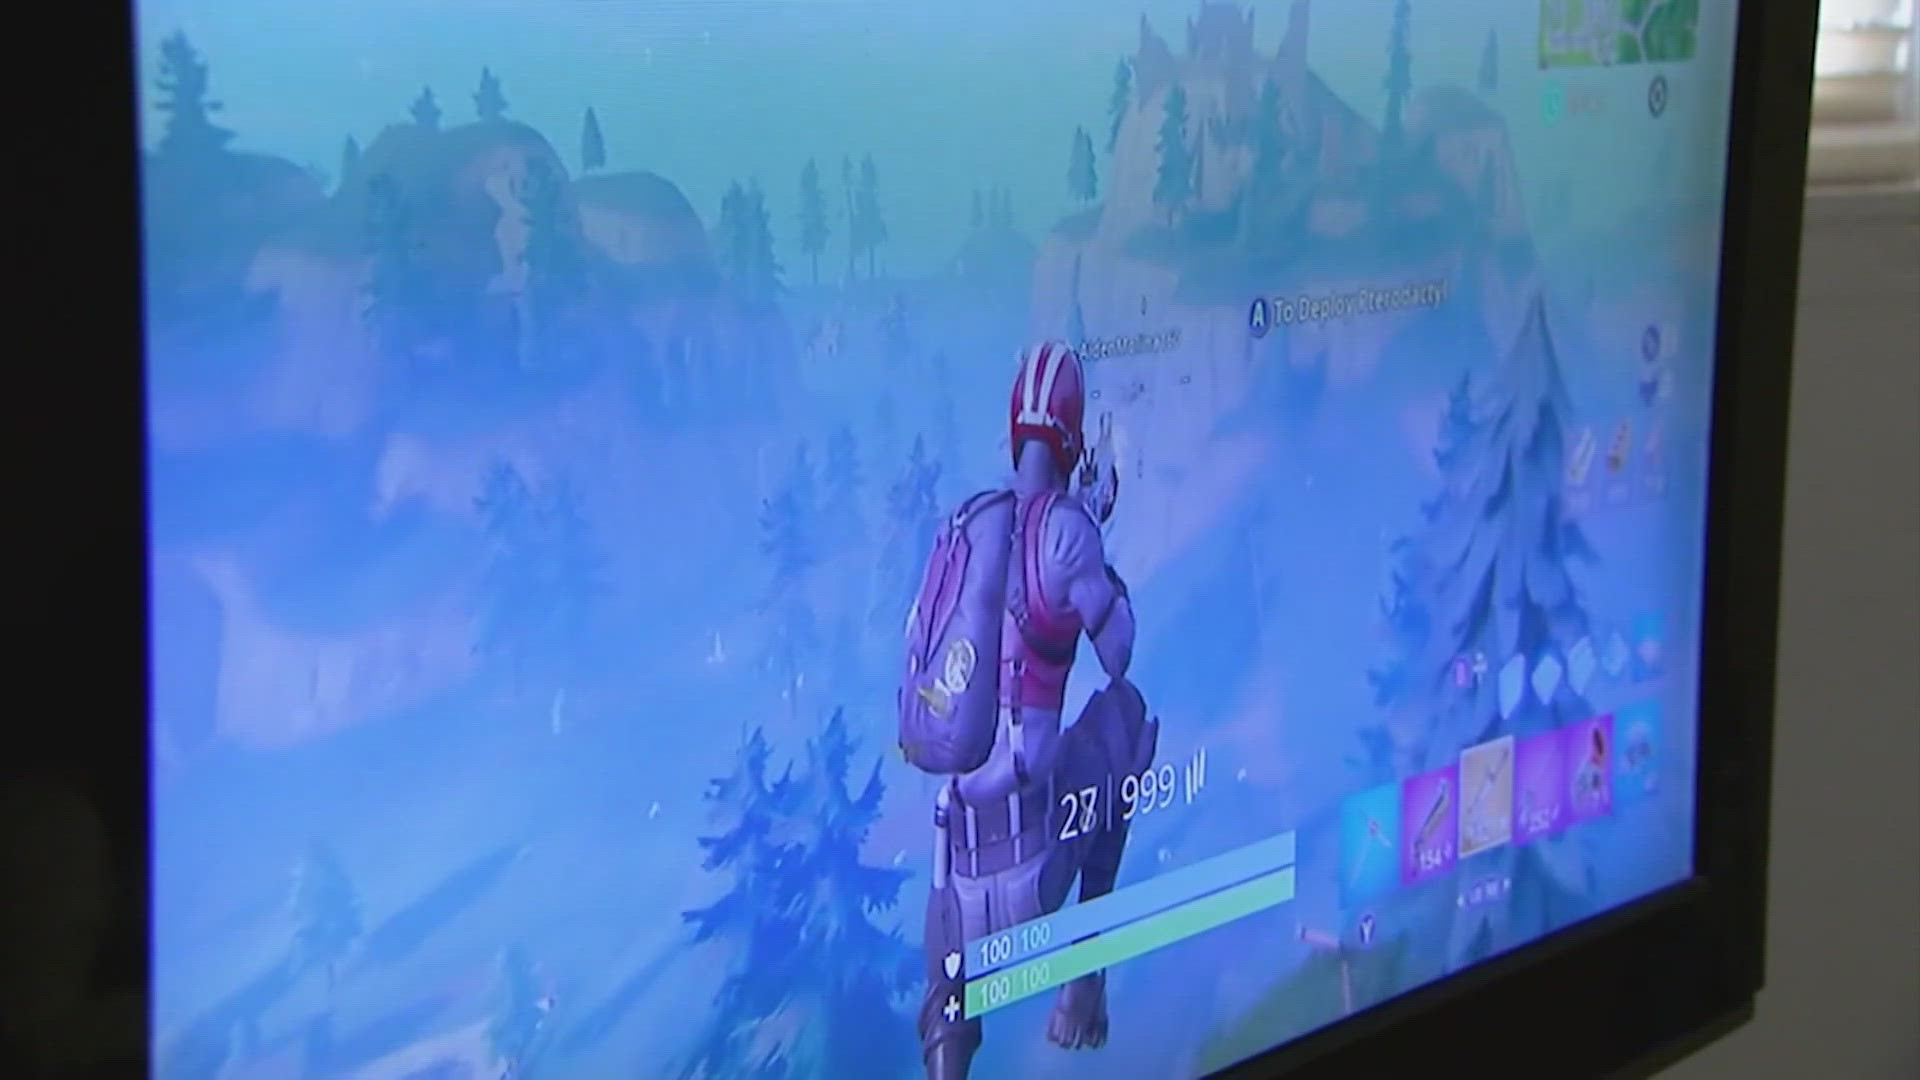 More than 37 million people may be eligible for cash refunds from the maker of the popular Fortnite video game.